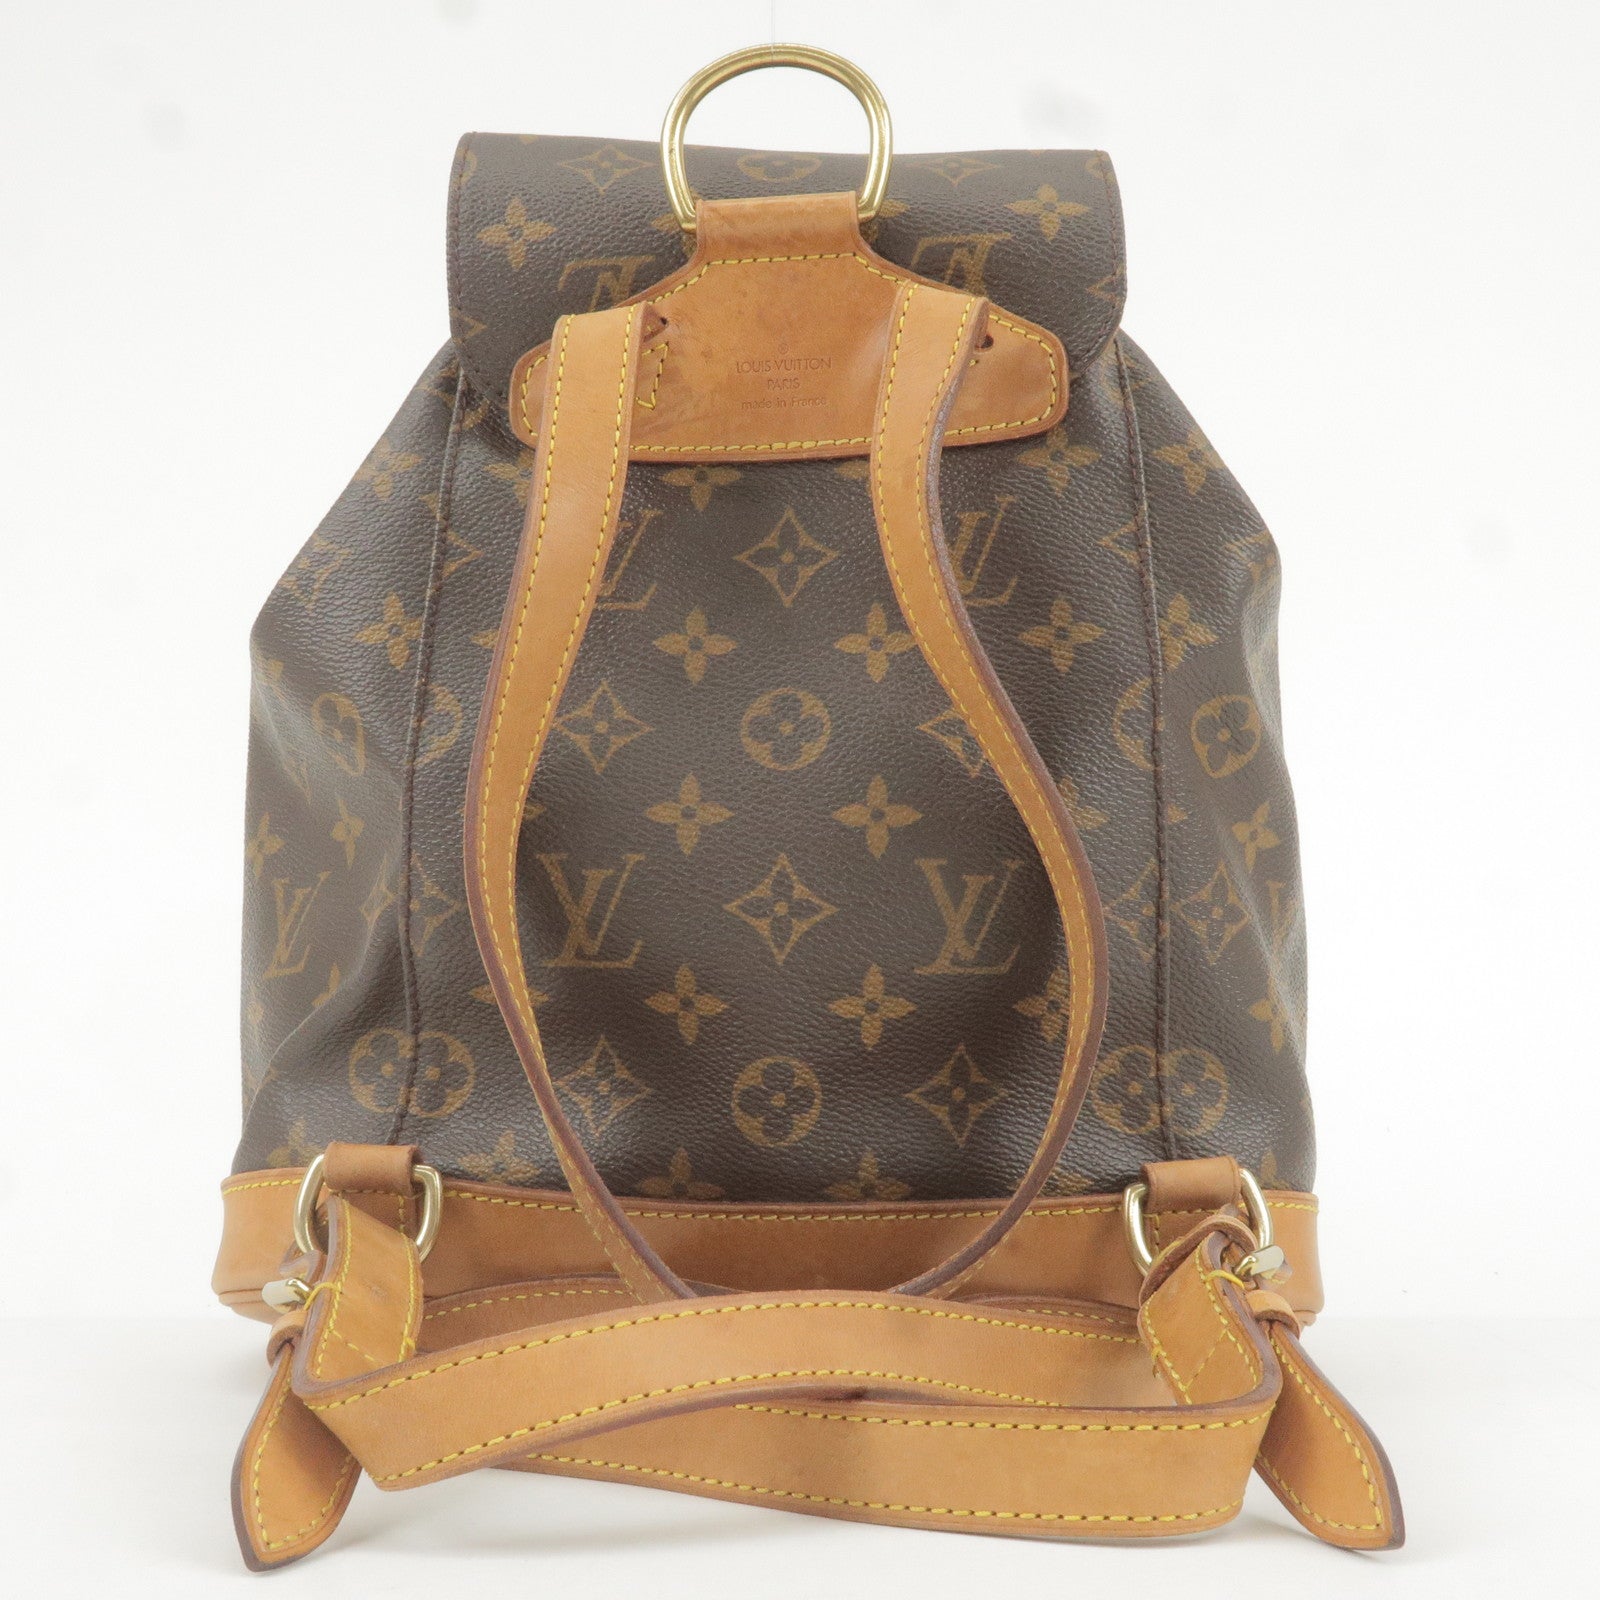 Used, GREAT CONDITION Louis Vuitton 2000s pre-owned Montsouris MM backpack